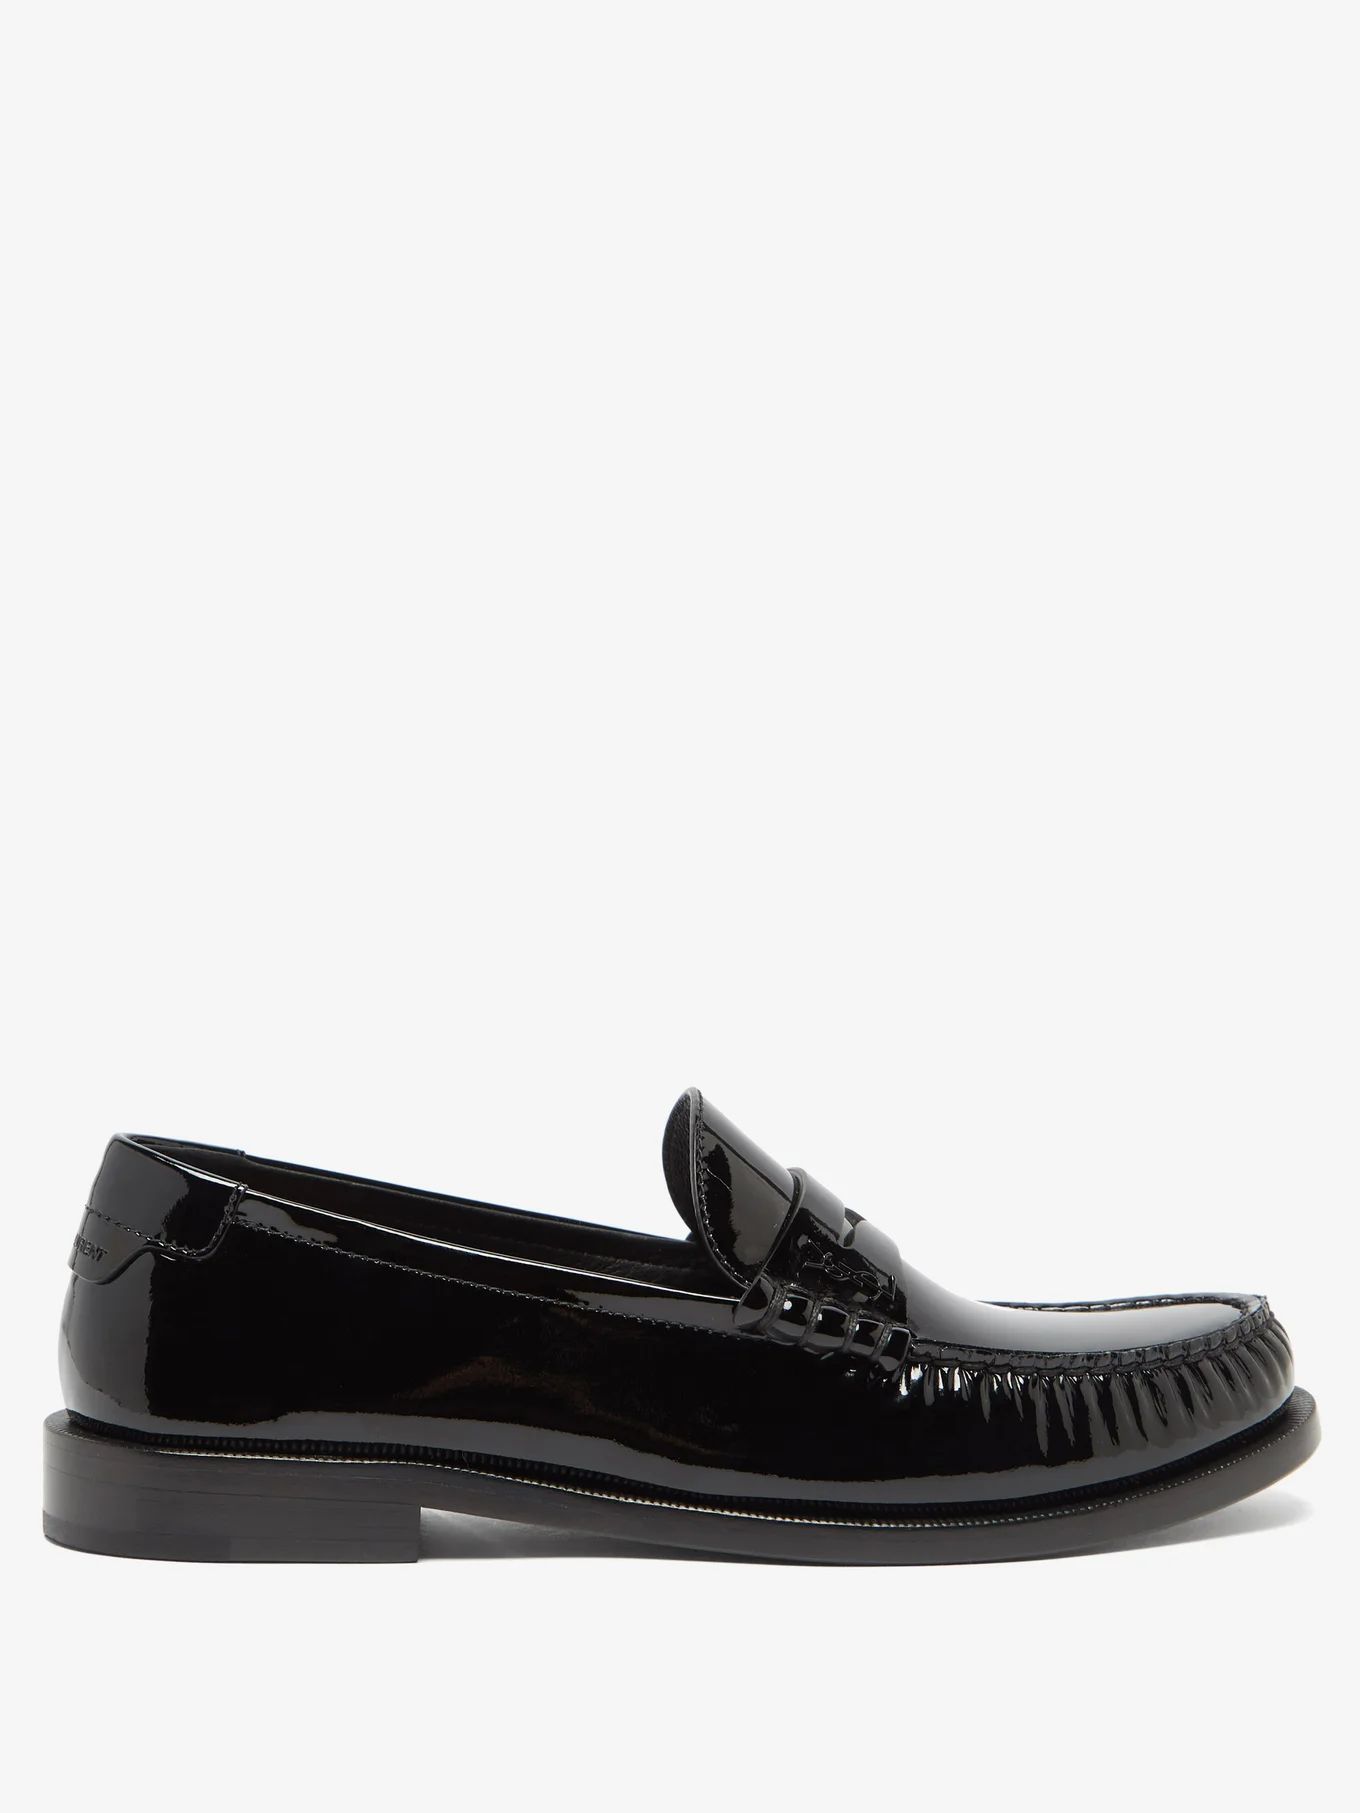 Le Loafer patent-leather penny loafers | Matches (US)